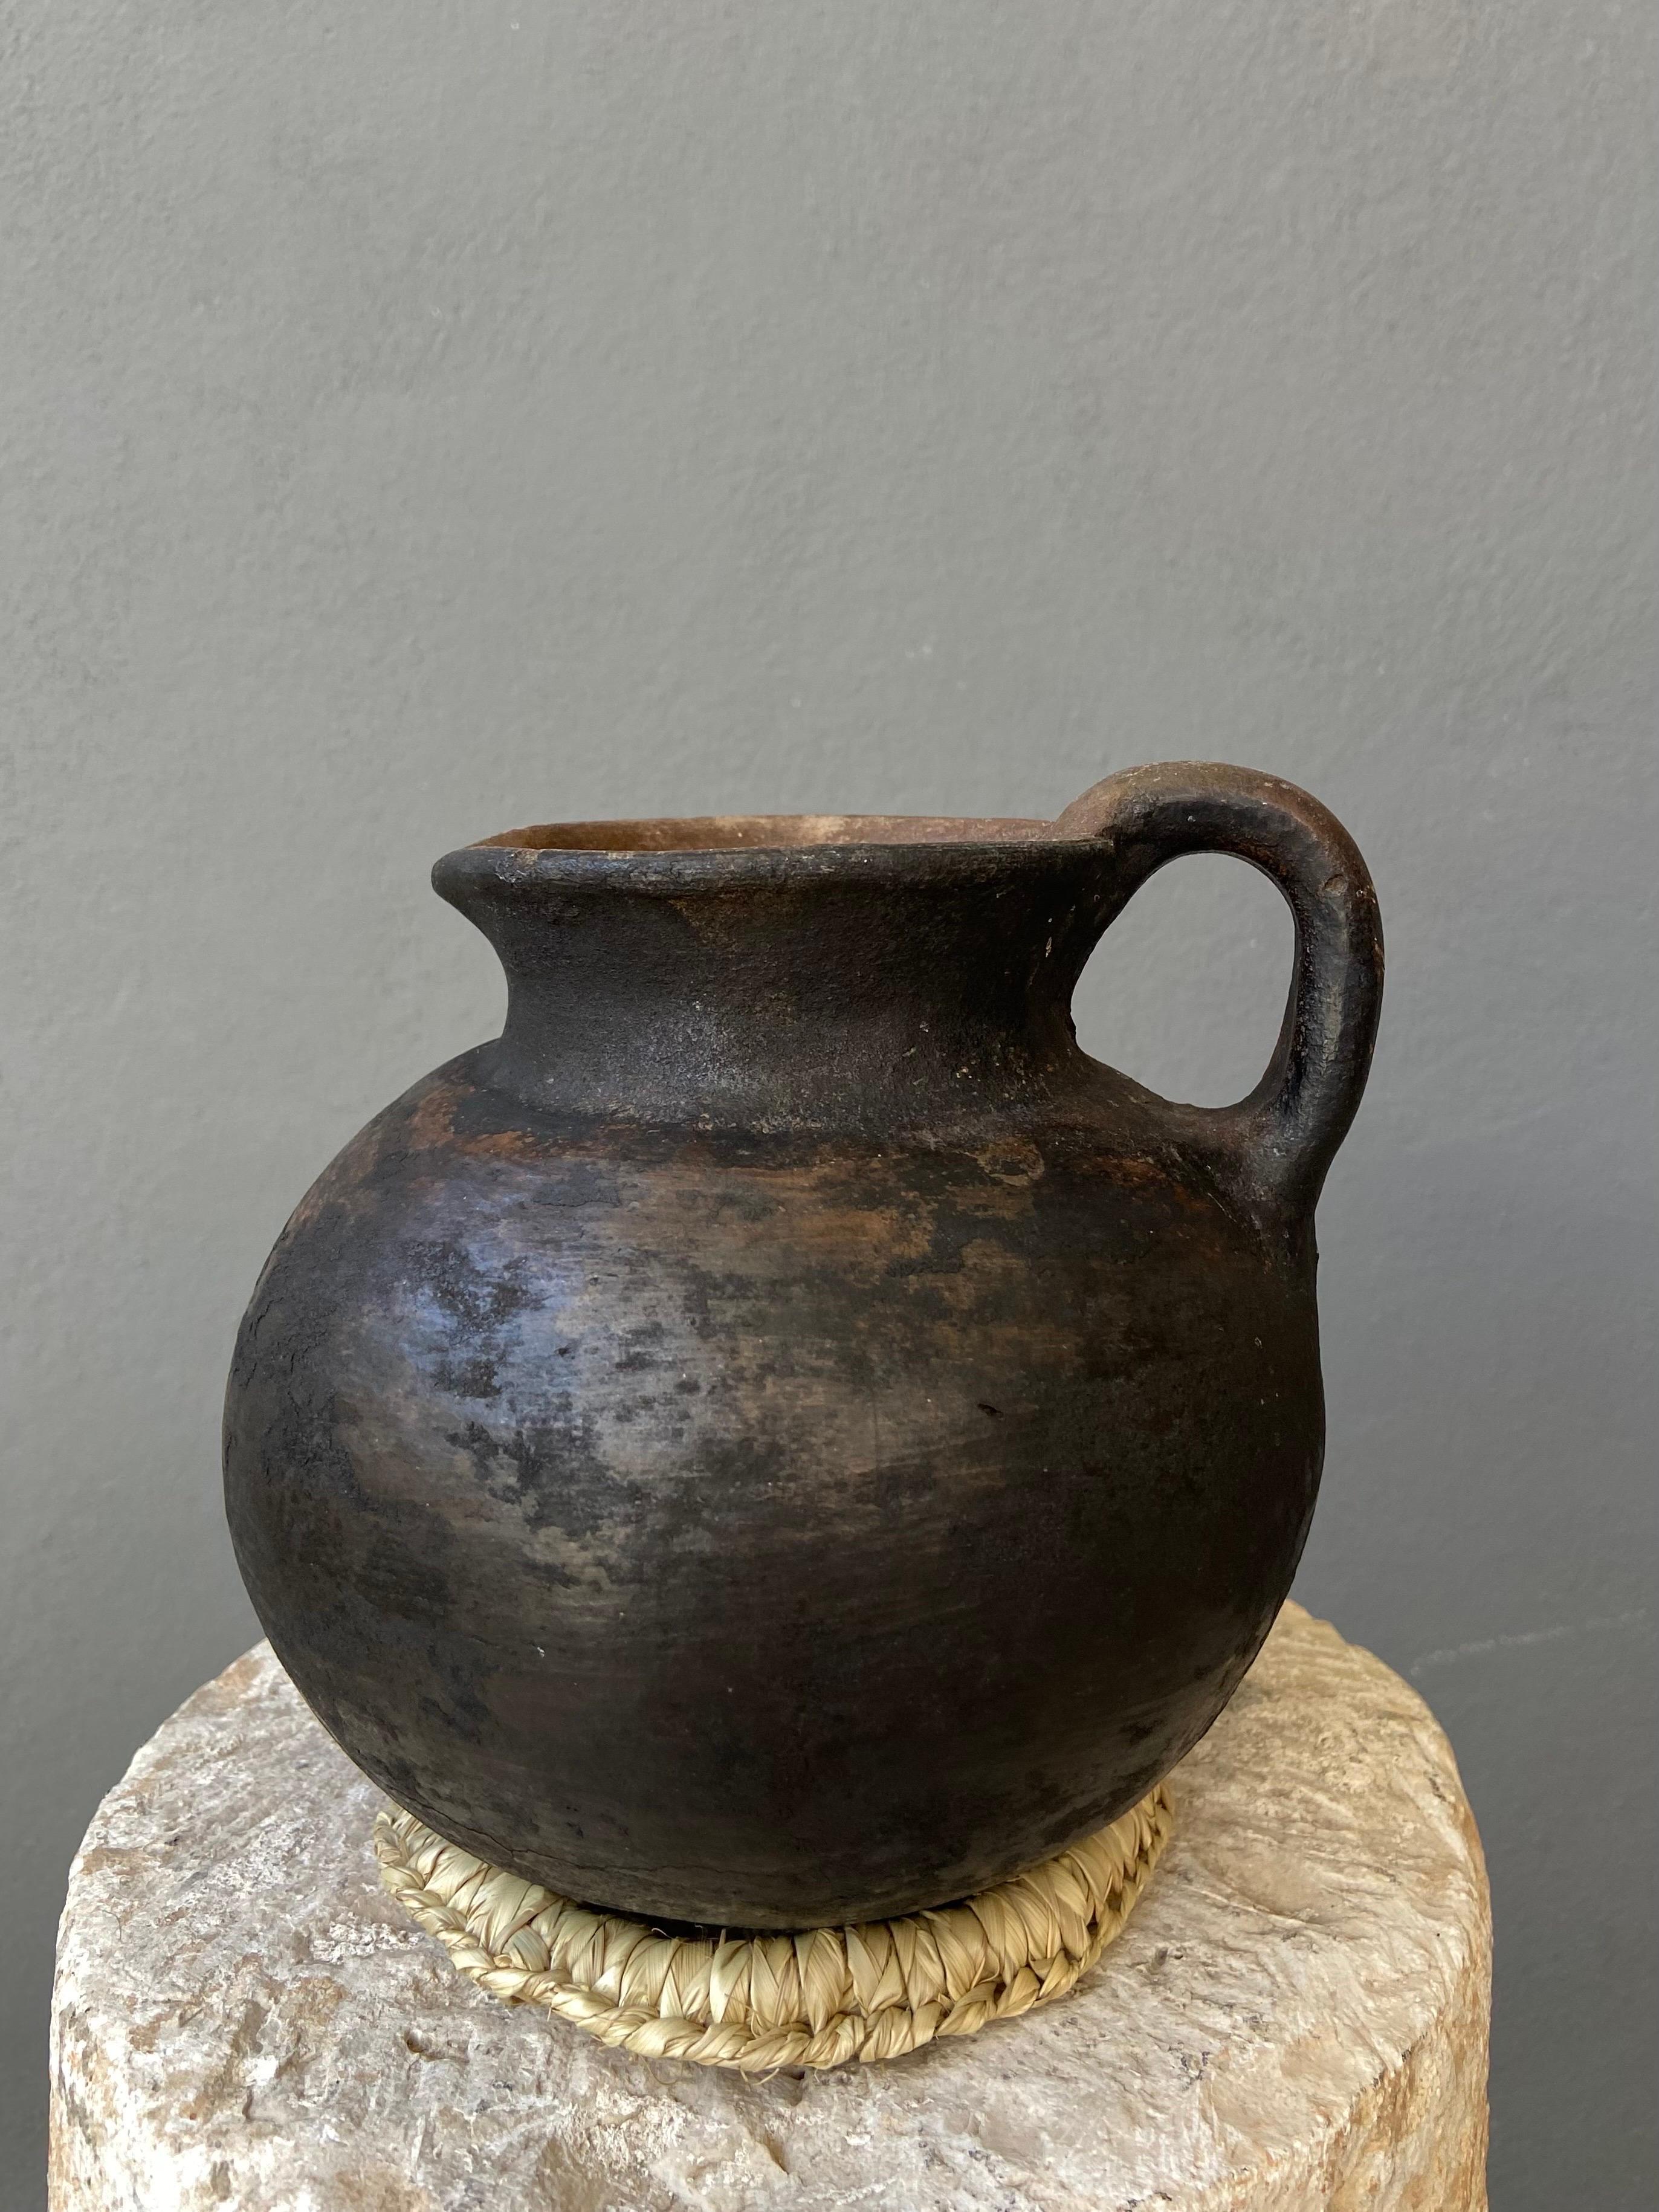 Fired Primitive Styled Terracotta Pitcher From Oaxaca, Mexico, Circa 1970´s